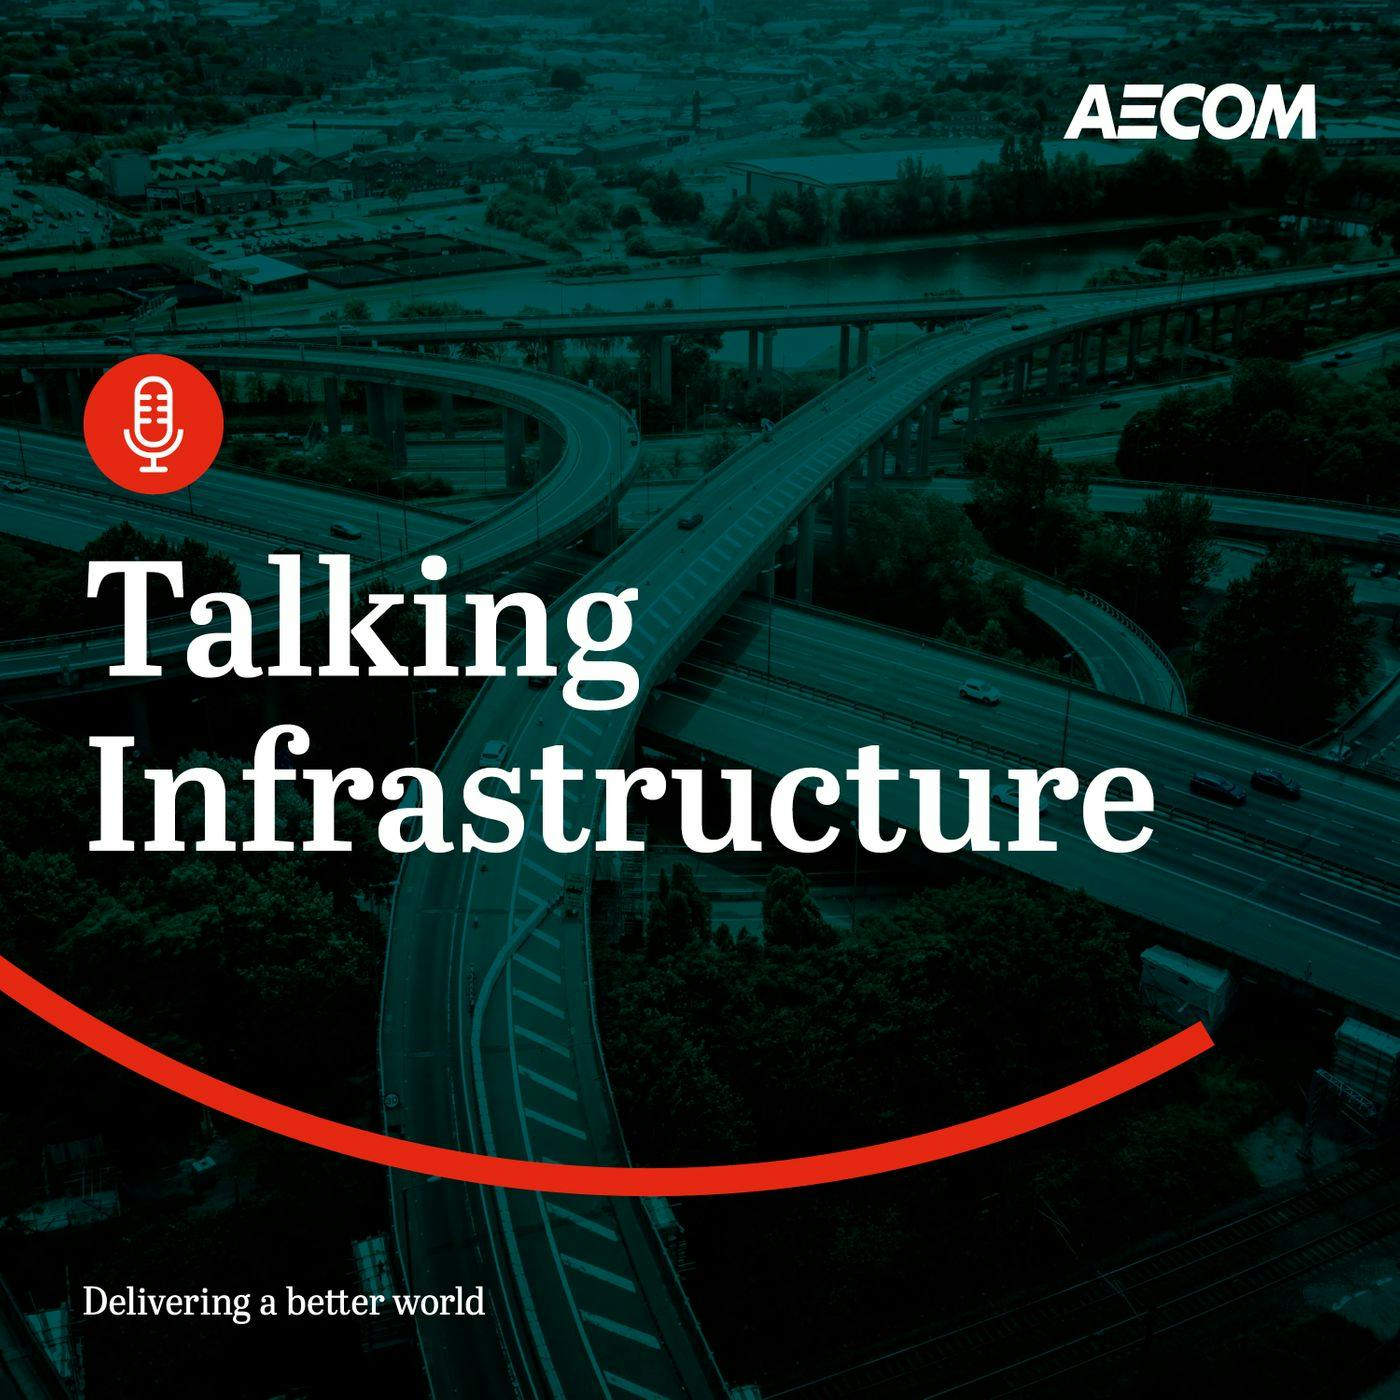 Building back better: how can infrastructure deliver positive social impact